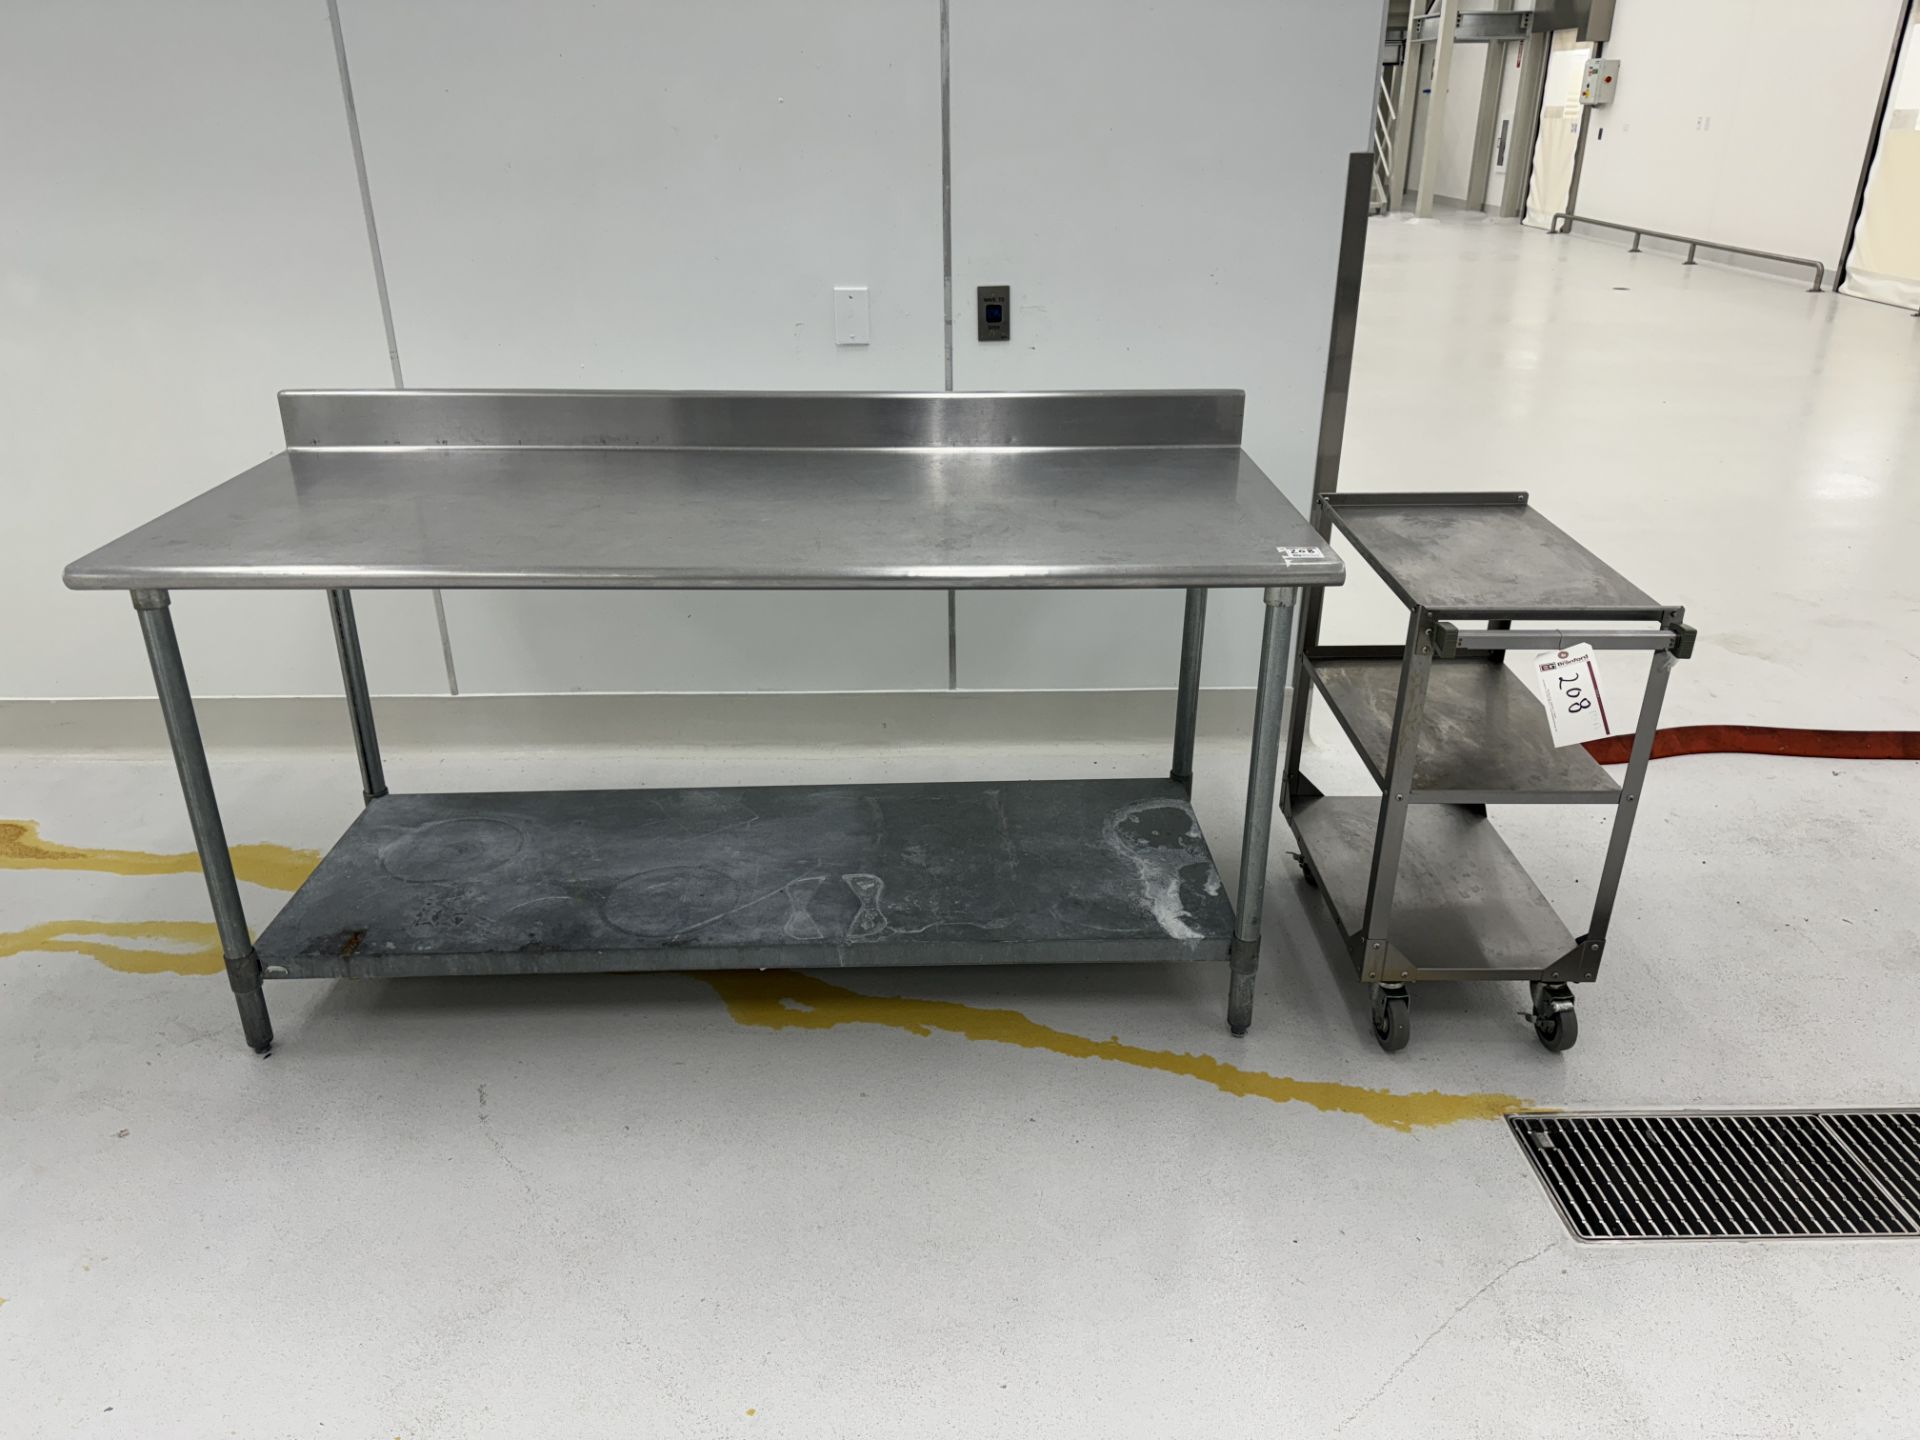 SS 2-tier lab bench and SS utility cart, ss platform